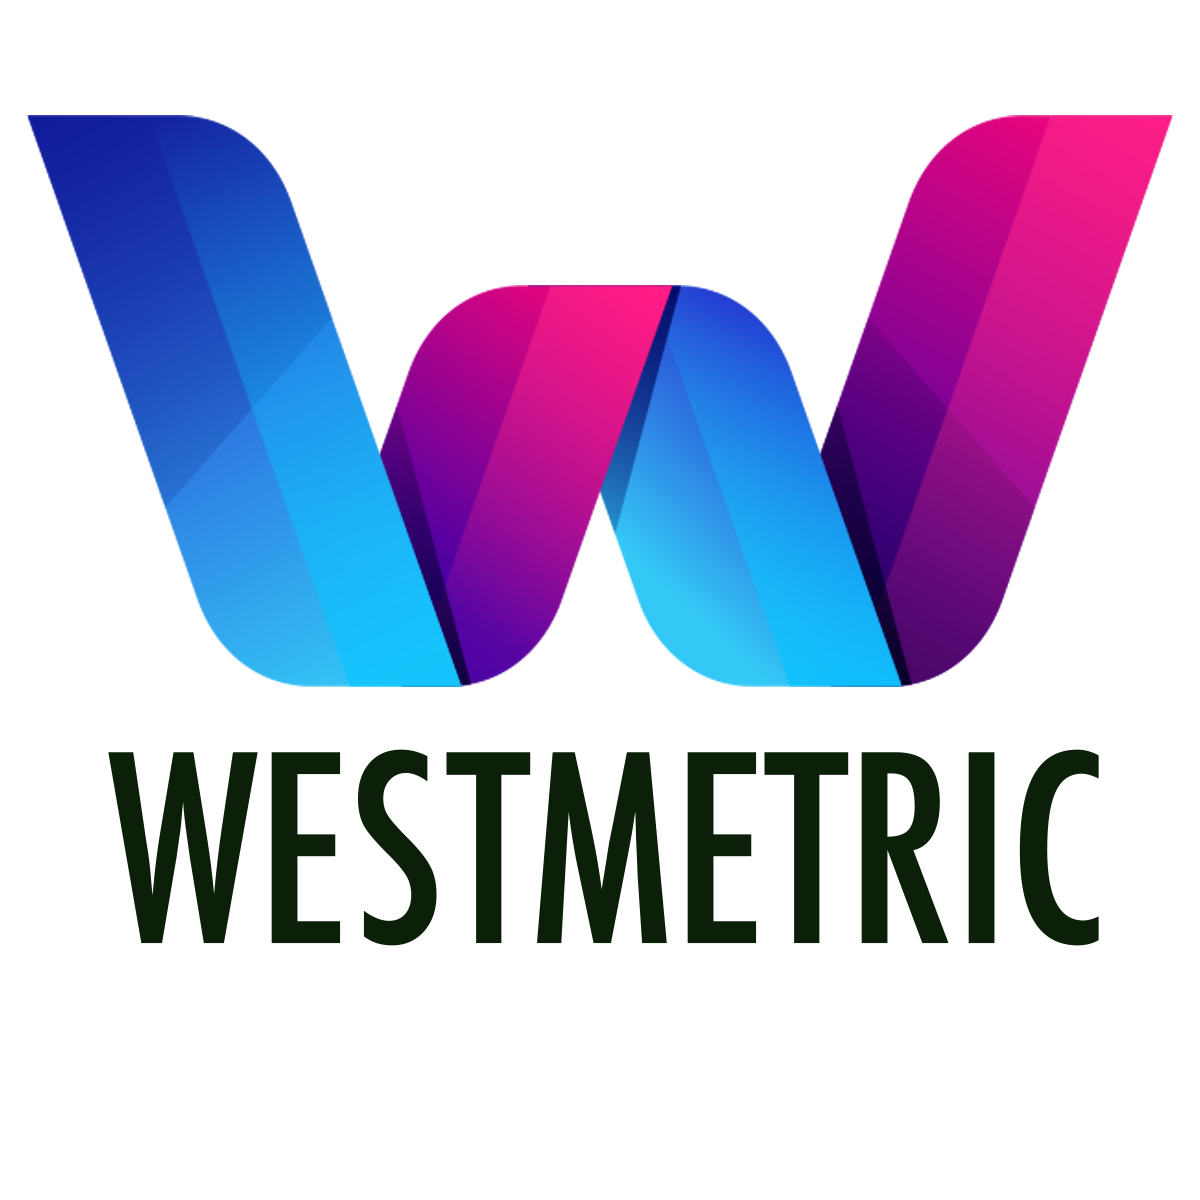 WestMetric W in blue and purple